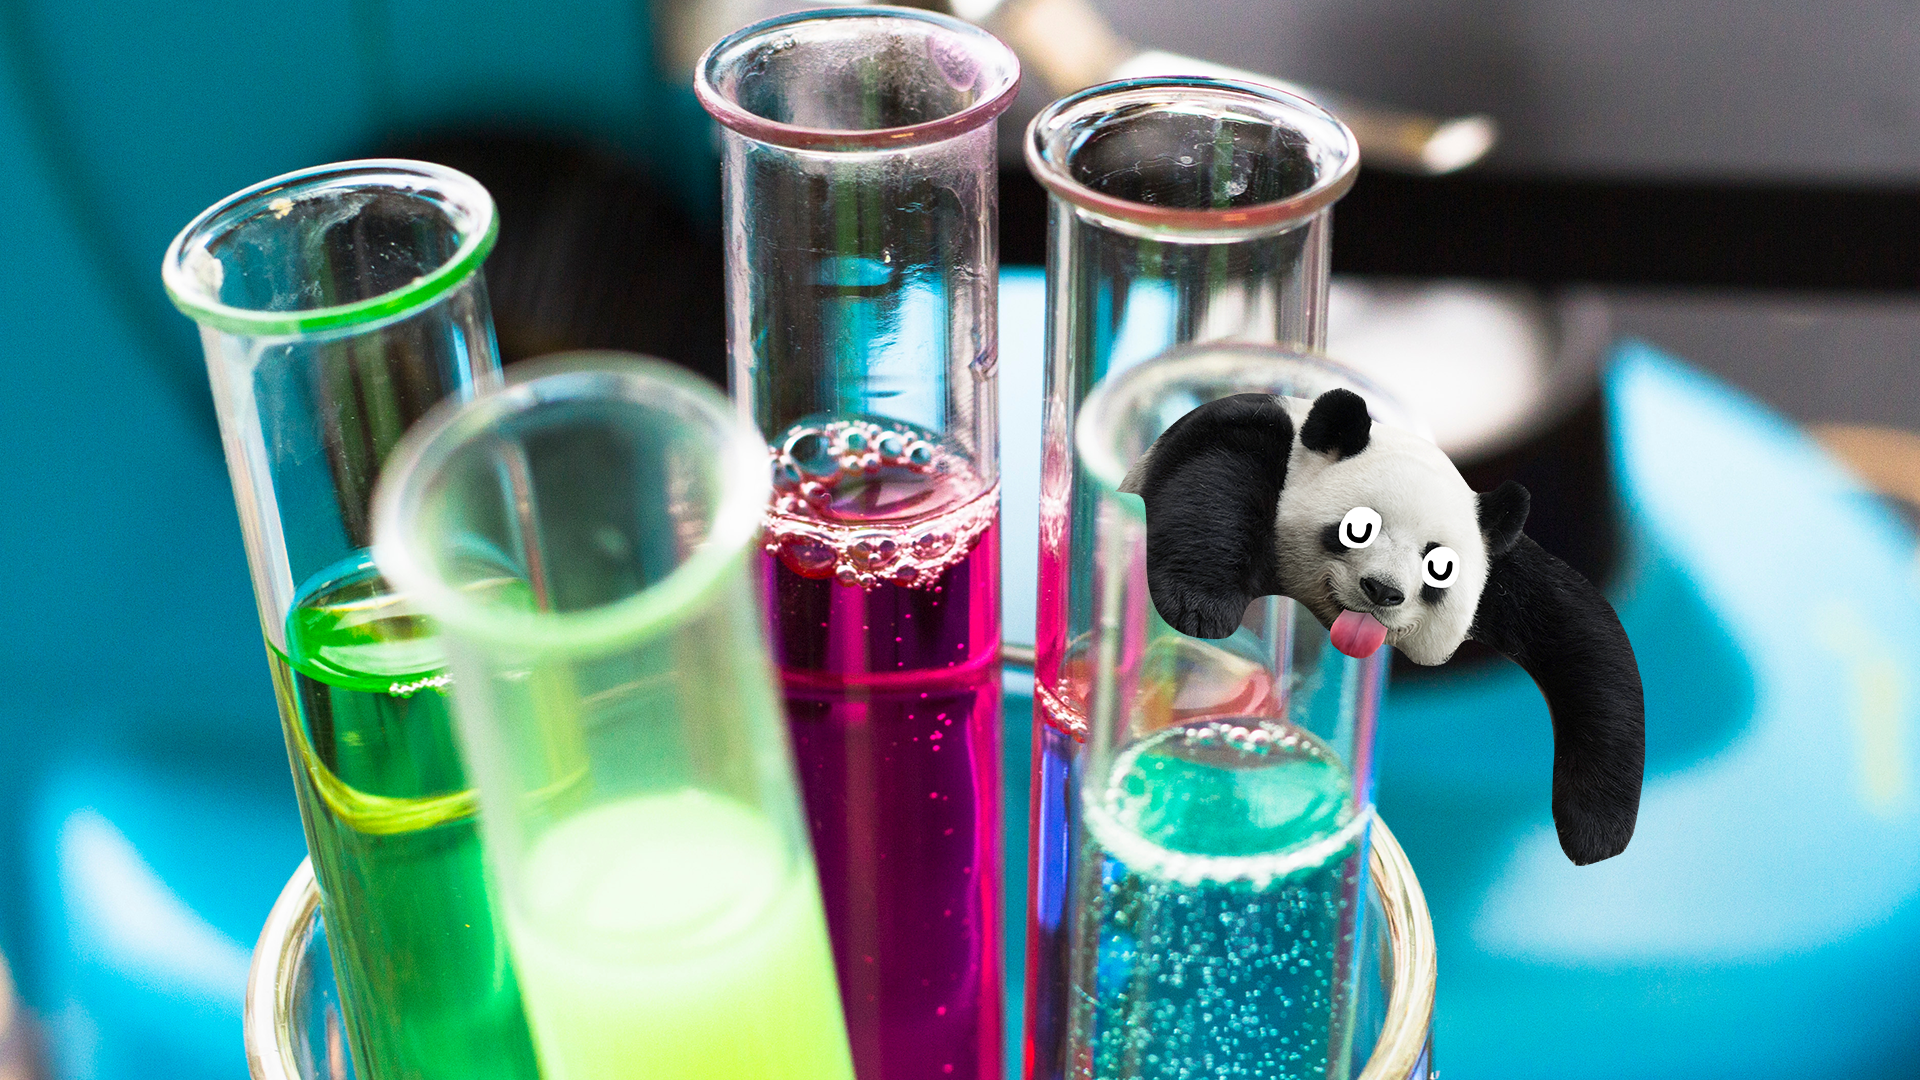 Chemistry tubes and derpy panda